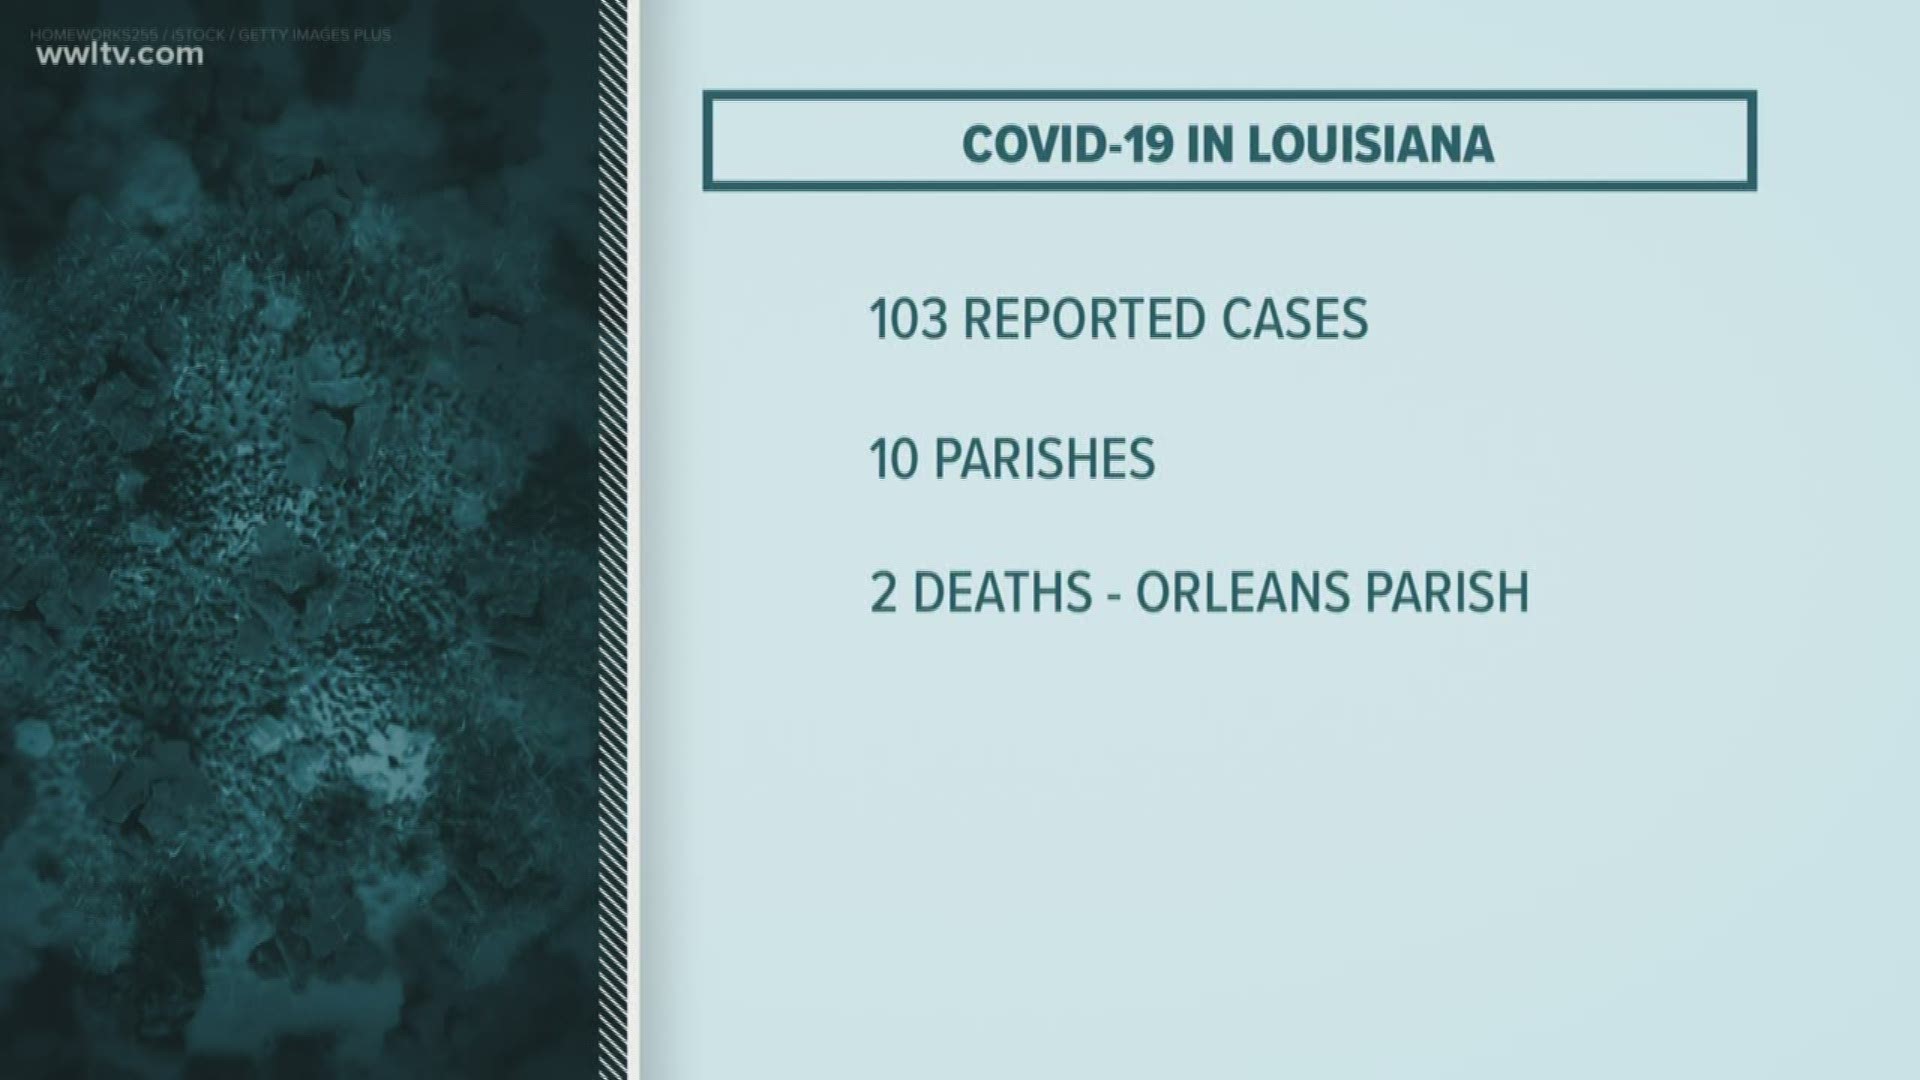 The number of cases in Louisiana has nearly tripled since Friday, and that number is expected to continue growing as more people are tested.